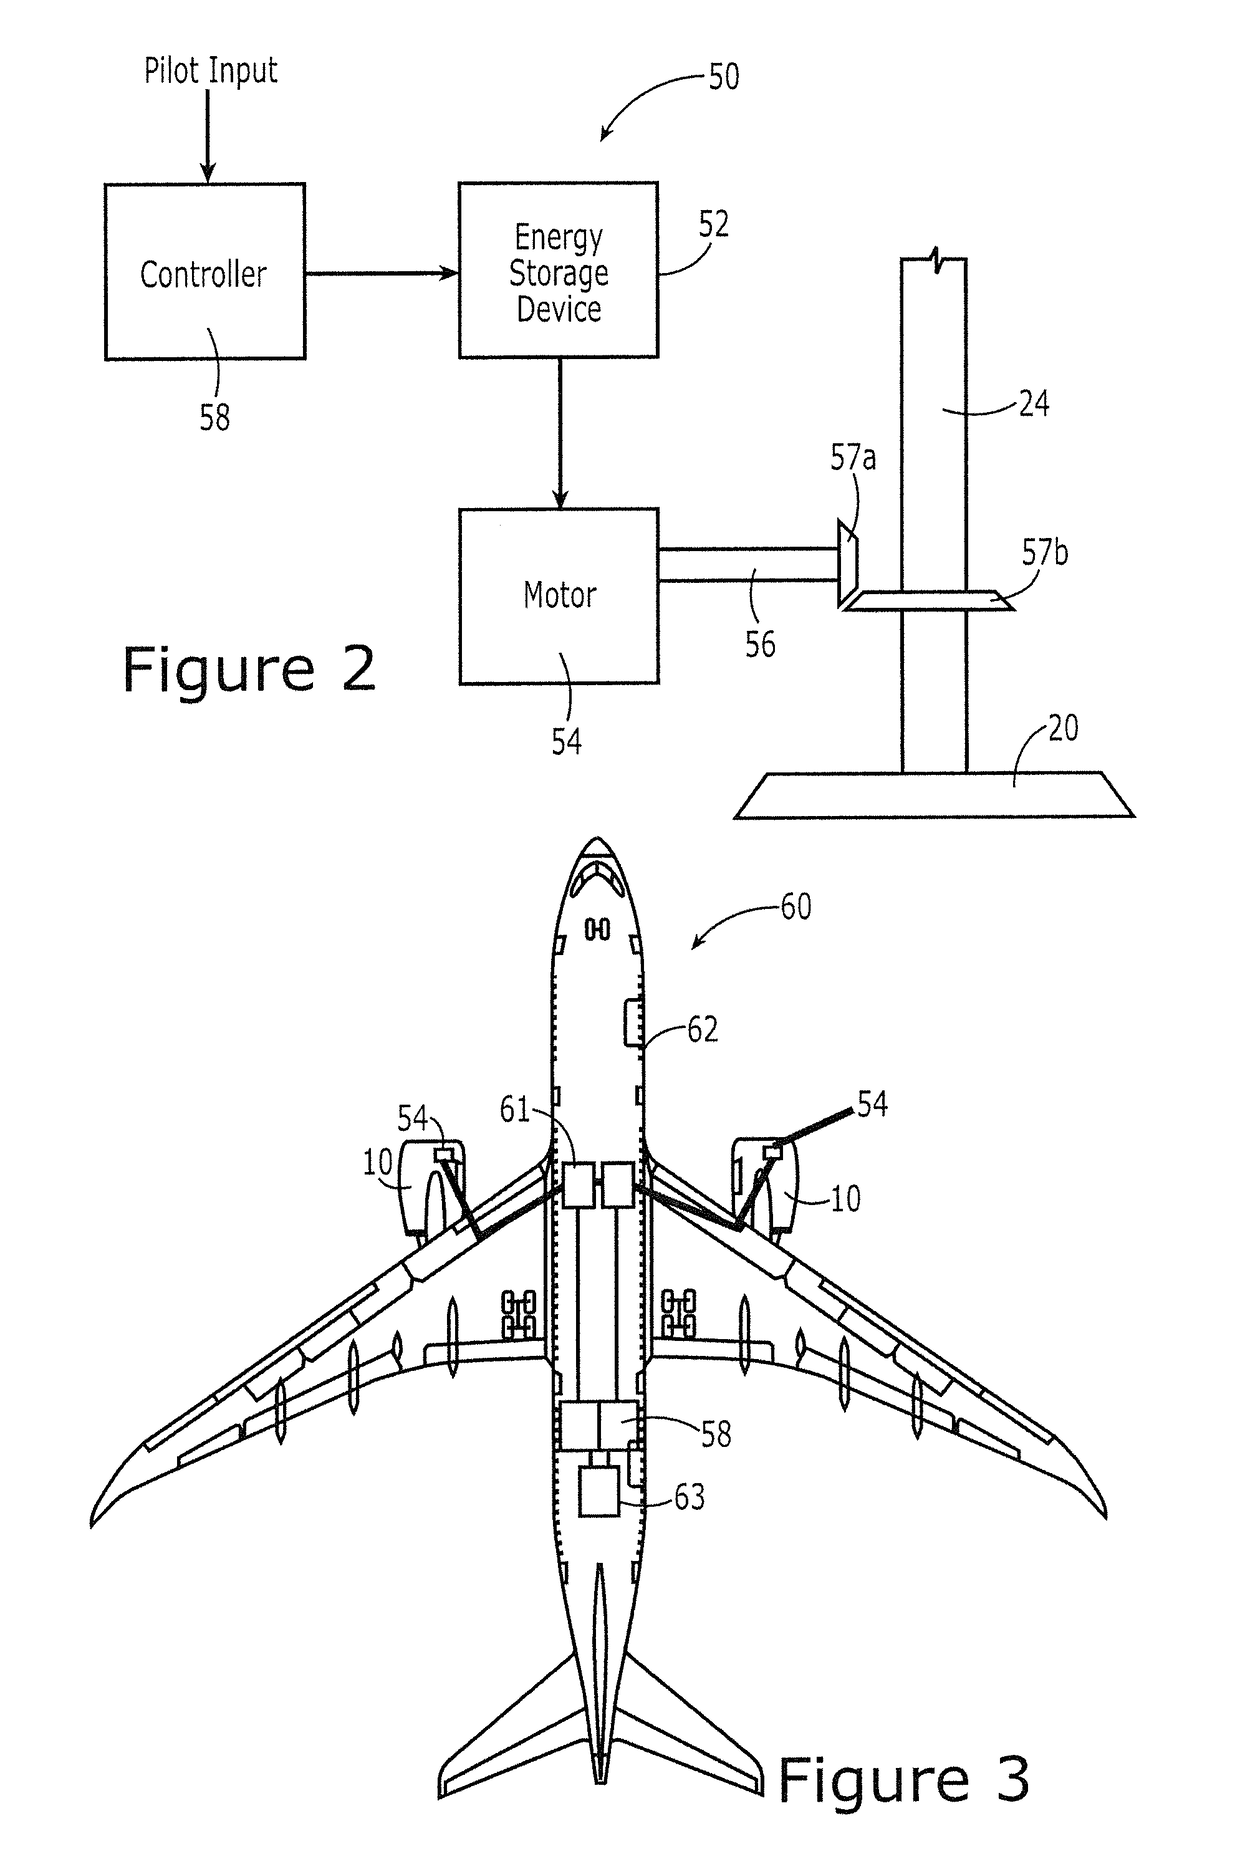 Aircraft engine and associated method for driving the fan with the low pressure shaft during taxi operations